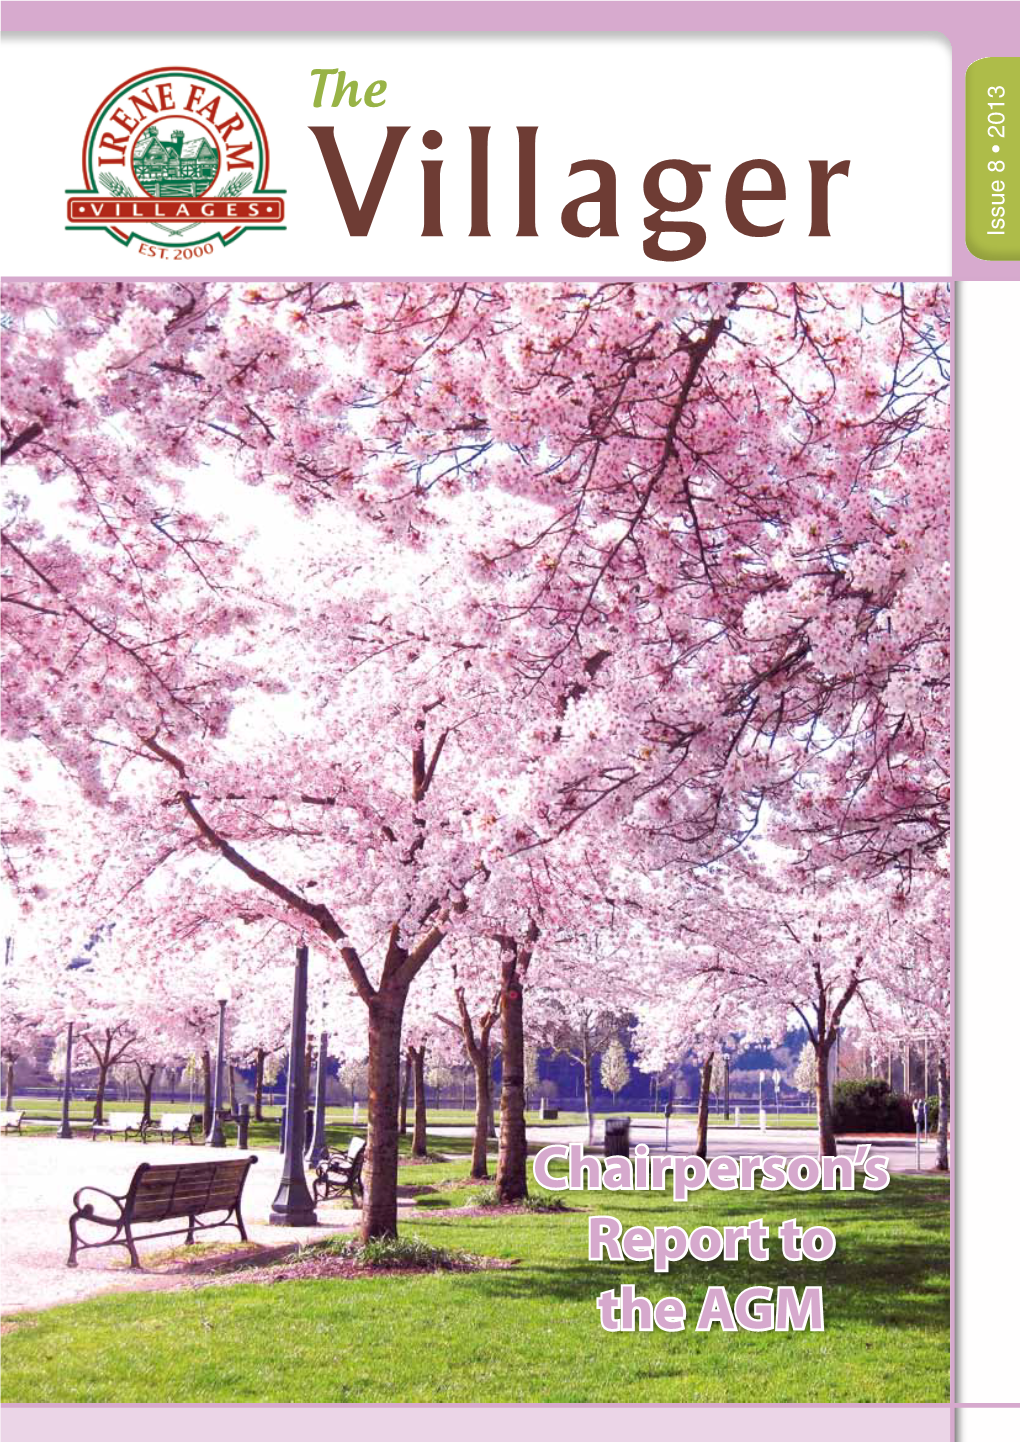 The Villager • Issue 8 2013 • 3 Chairperson